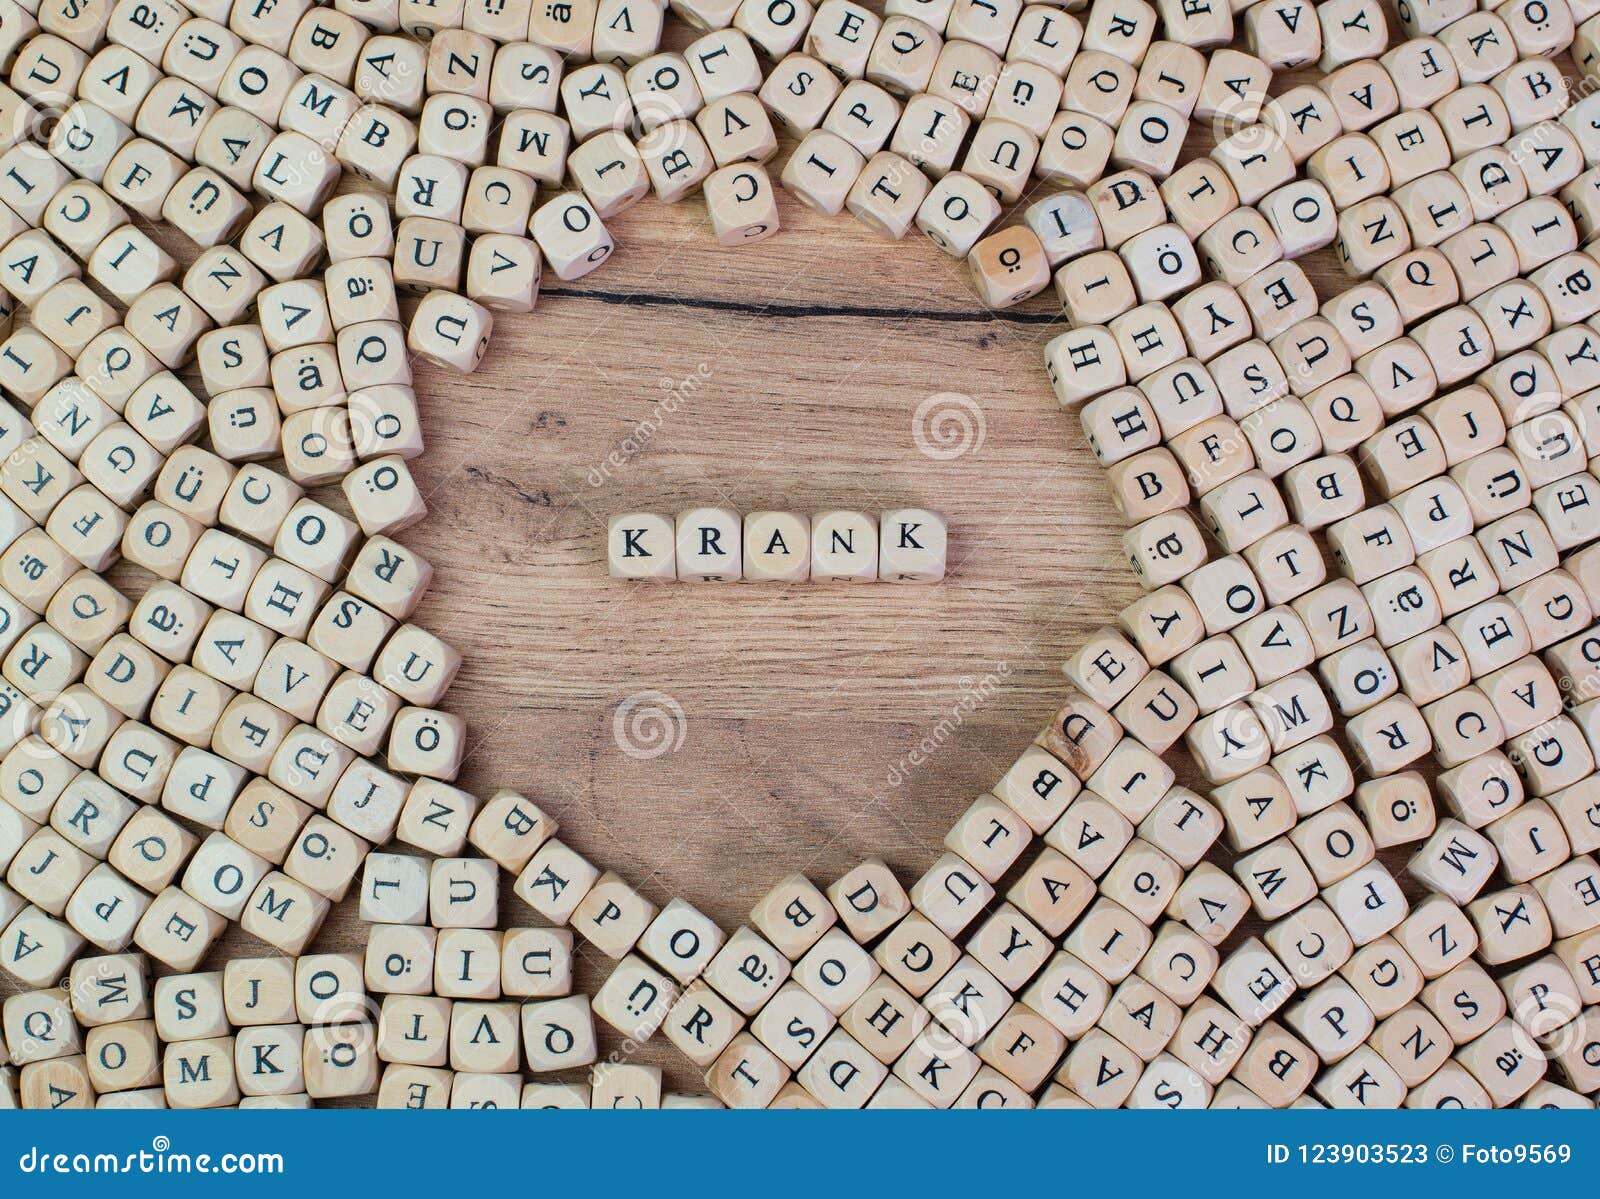 krank, german text for sick, word in letters on cube dices on table